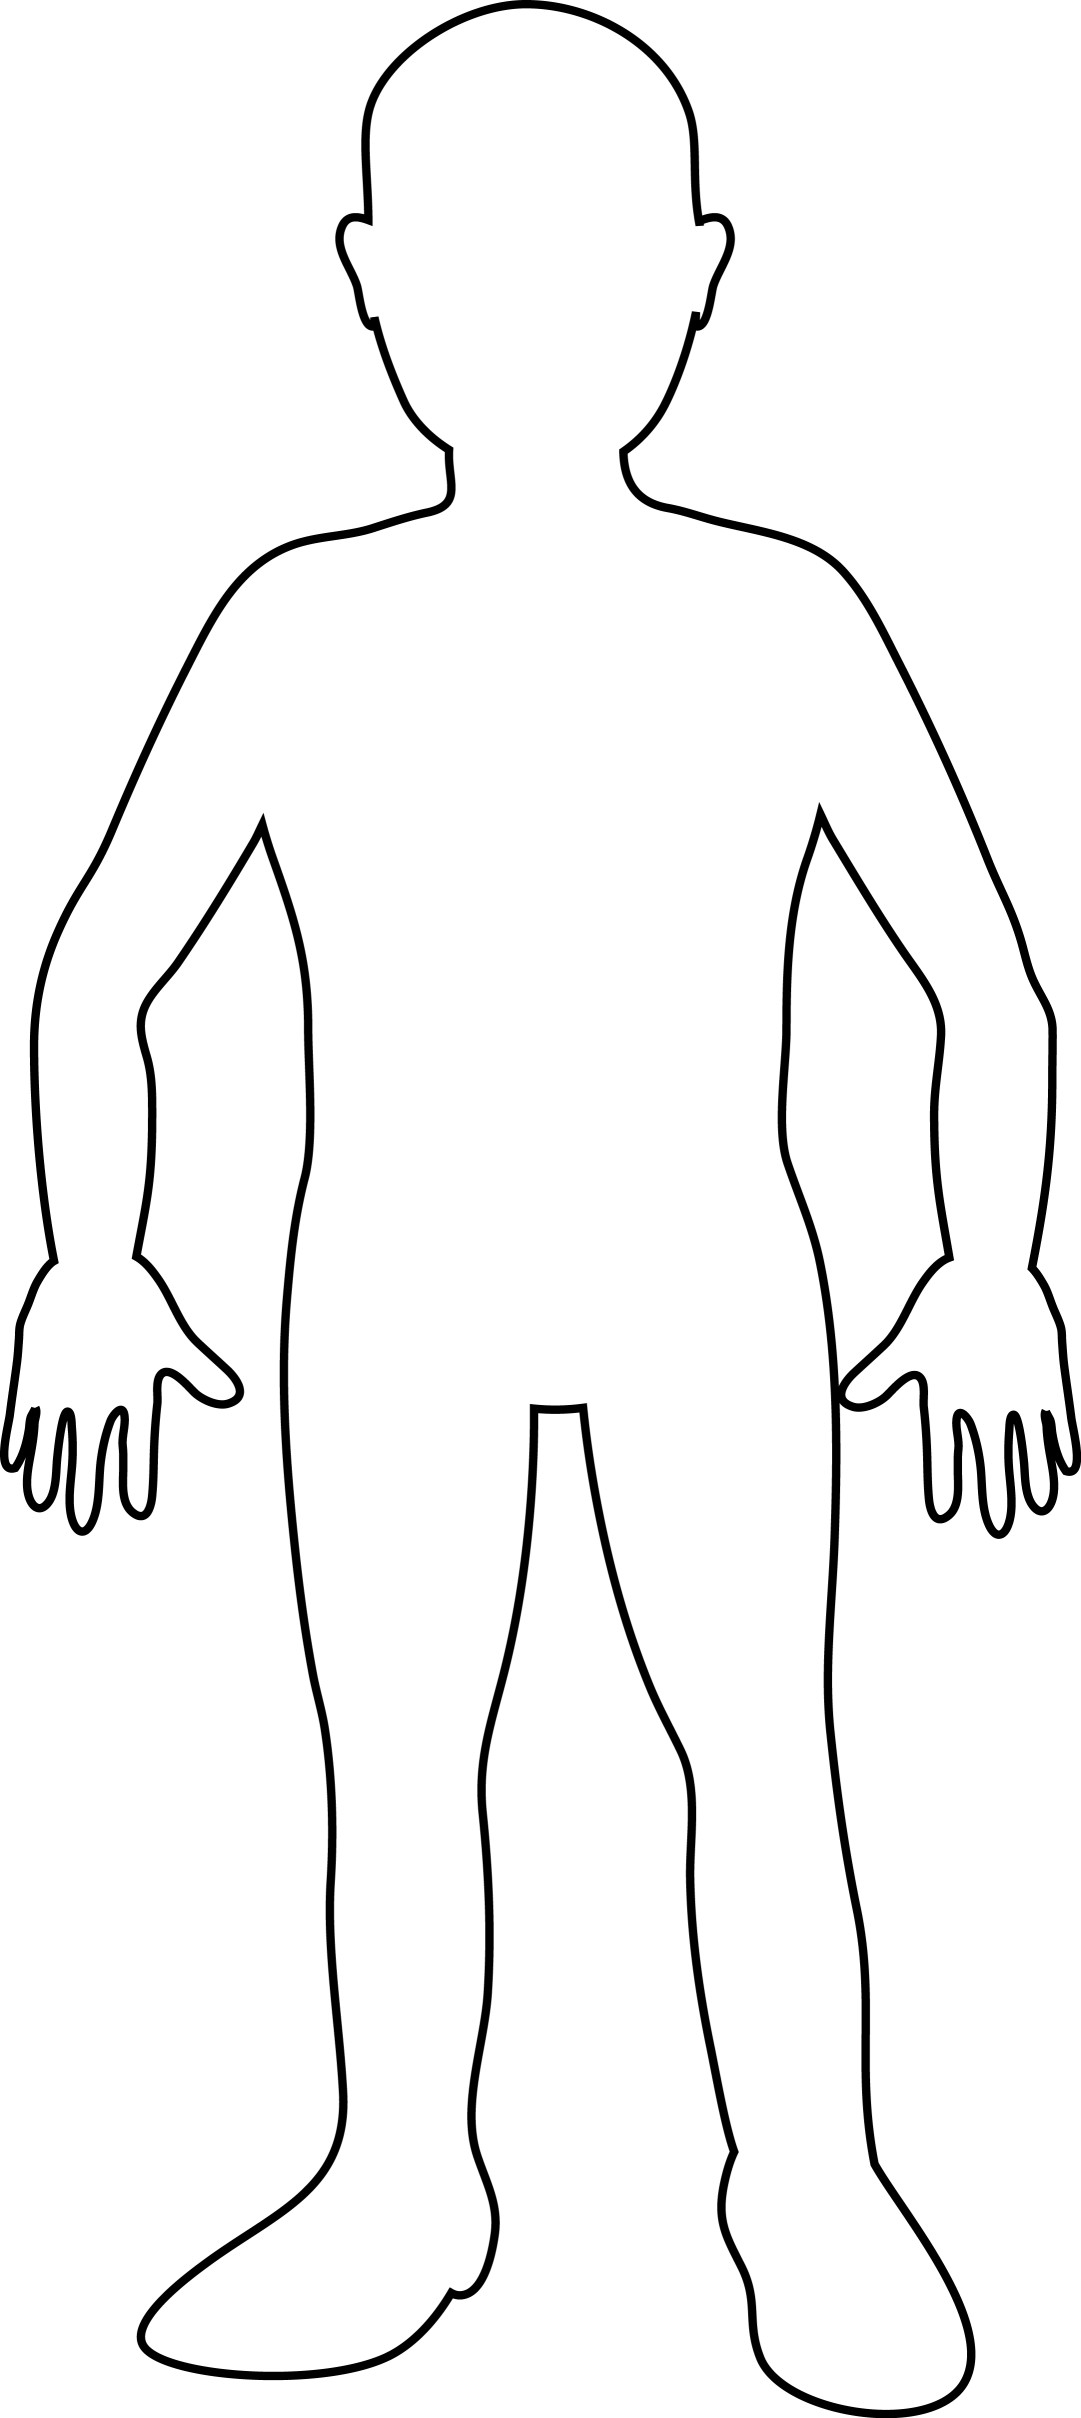 Printable Outline Of Person .